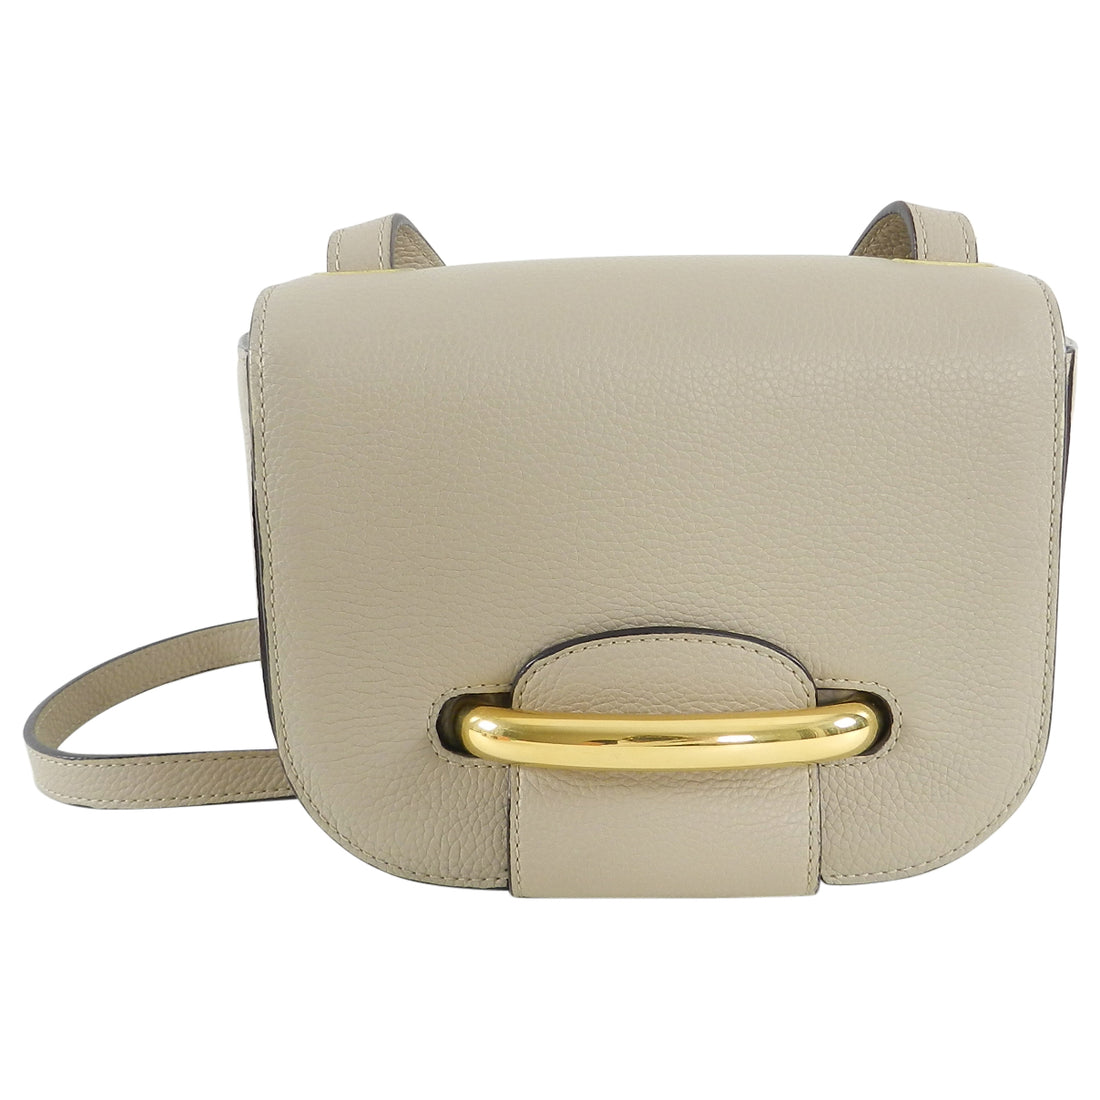 Mulberry Small Light Taupe Selwood Bag with Gold Bar